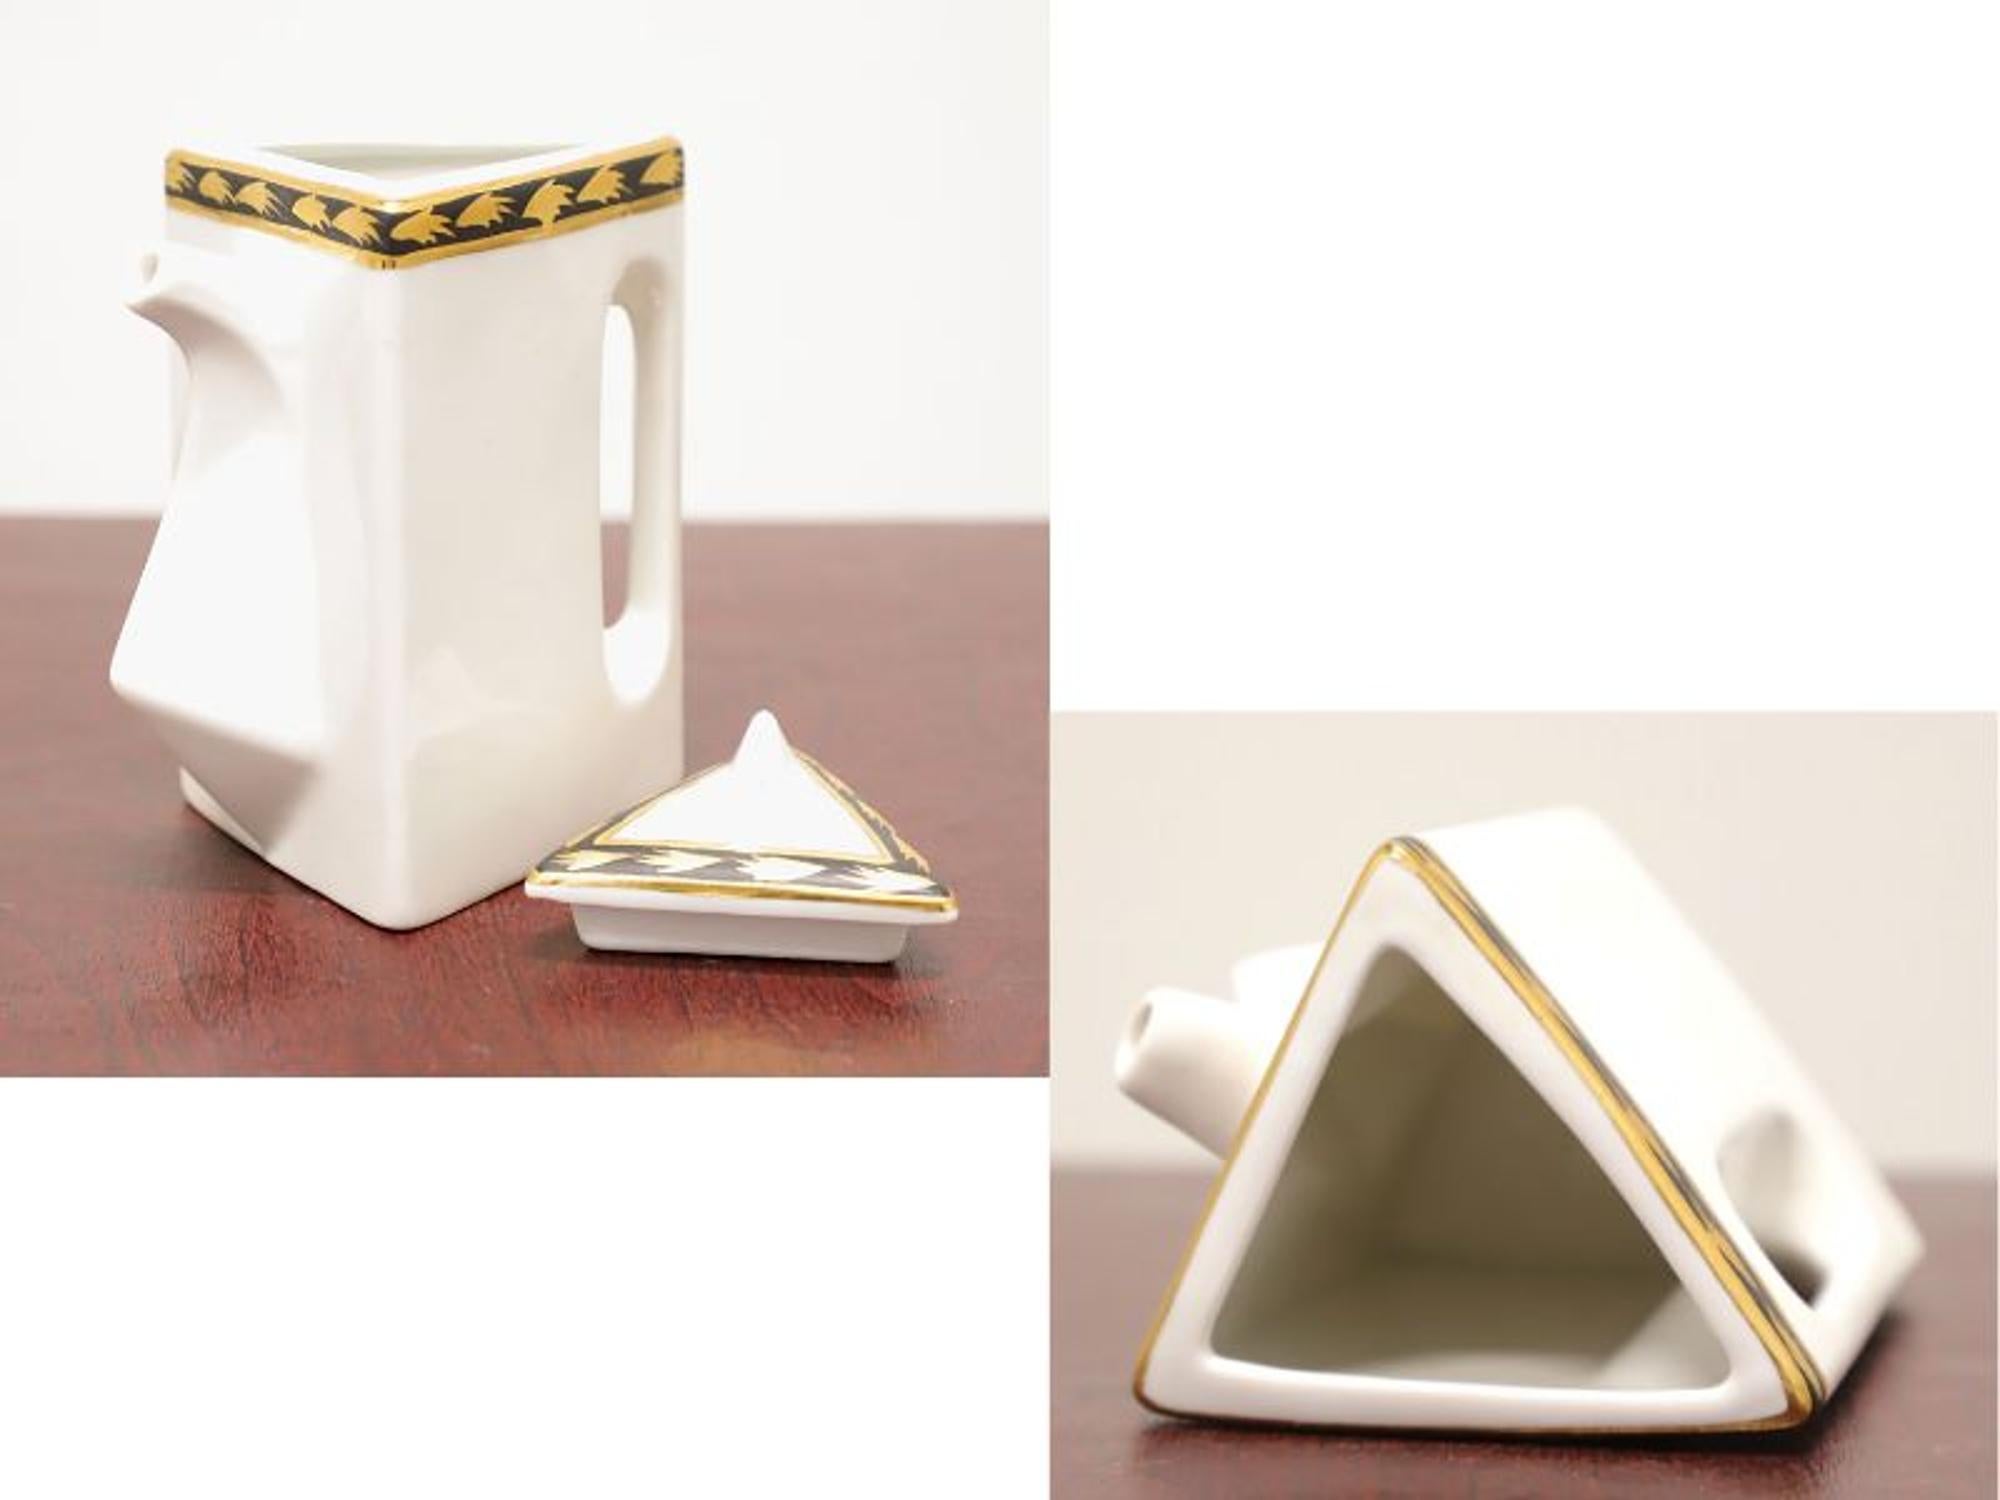 CUSINS Porcelain Triangular Coffee & Desert Set - Service for Five In Good Condition For Sale In Charlotte, NC